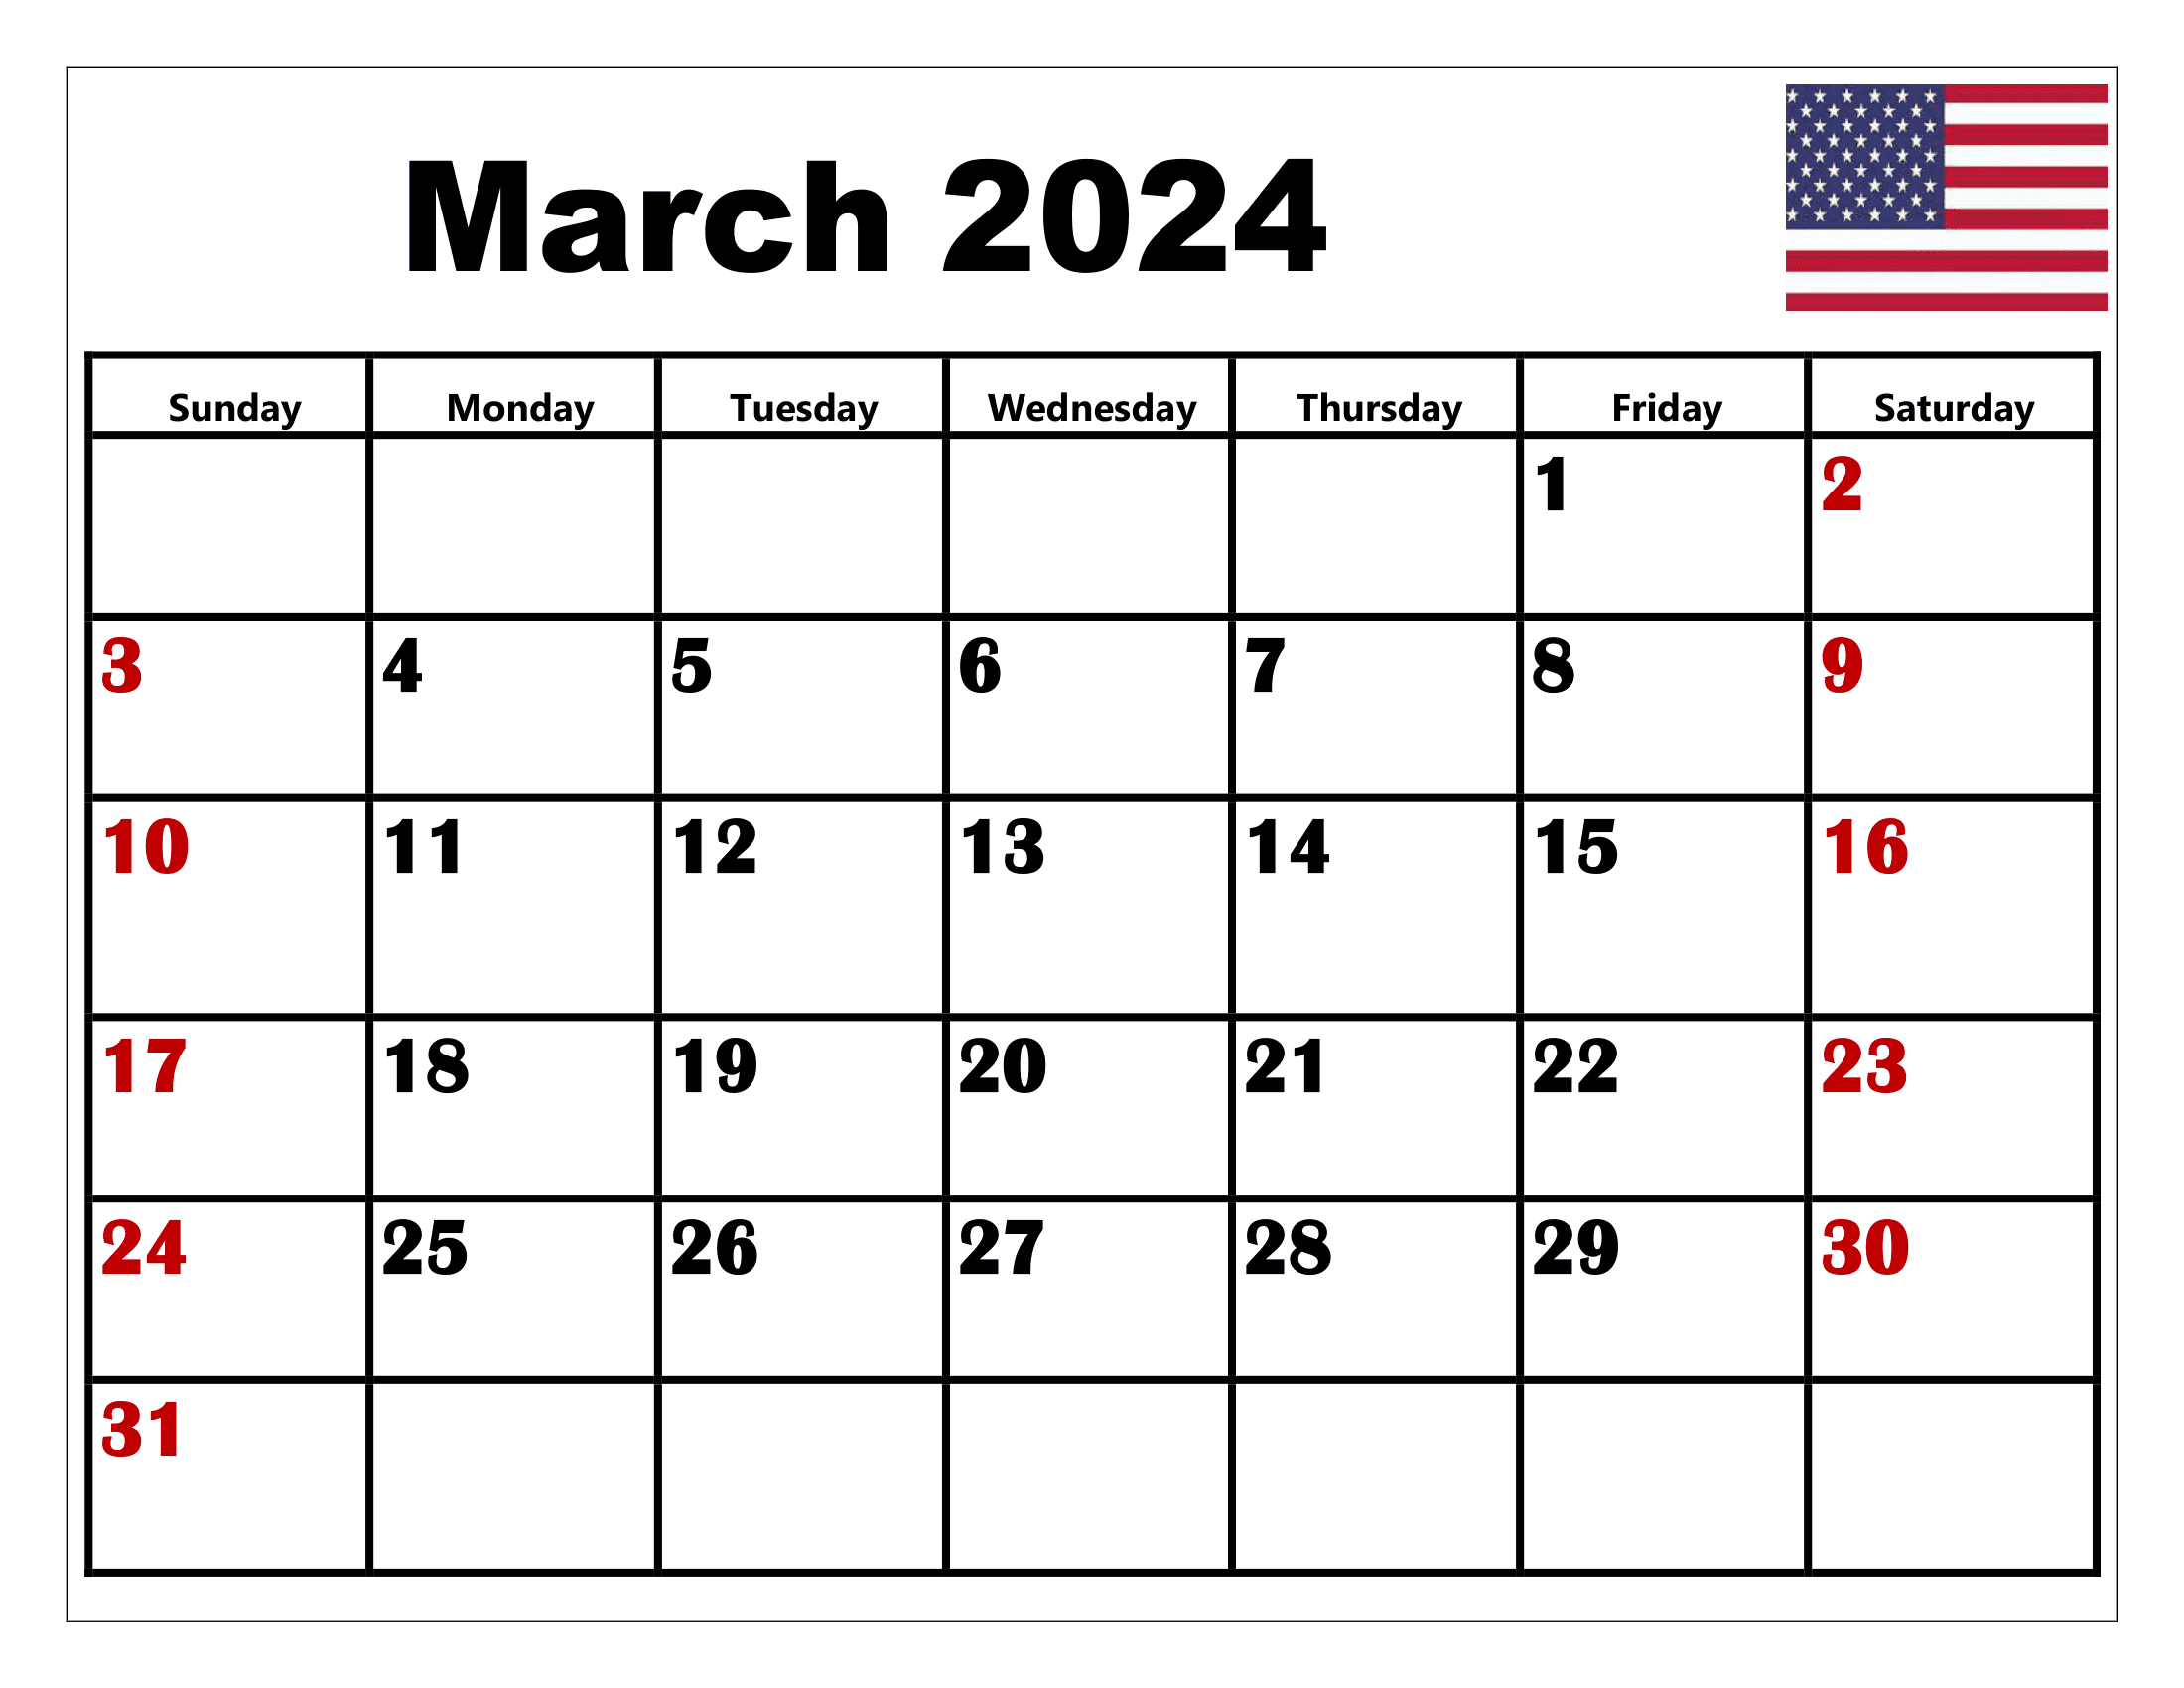 March 2024 Calendar Printable Pdf With Holidays Template Free for March 2024 Calendar With Holidays Free Printable